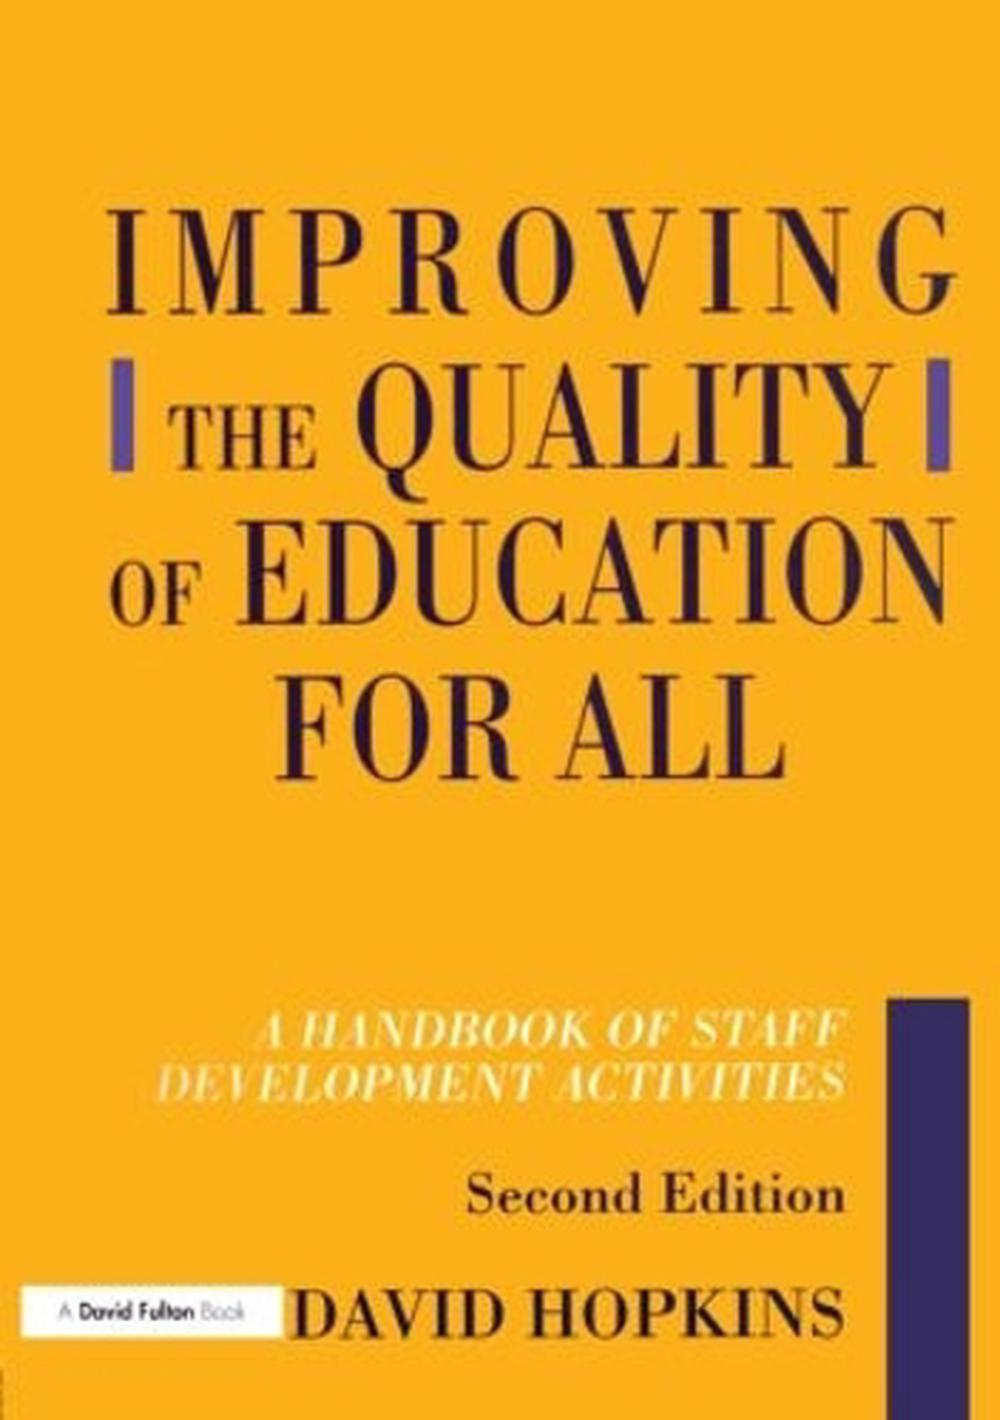 books on quality education